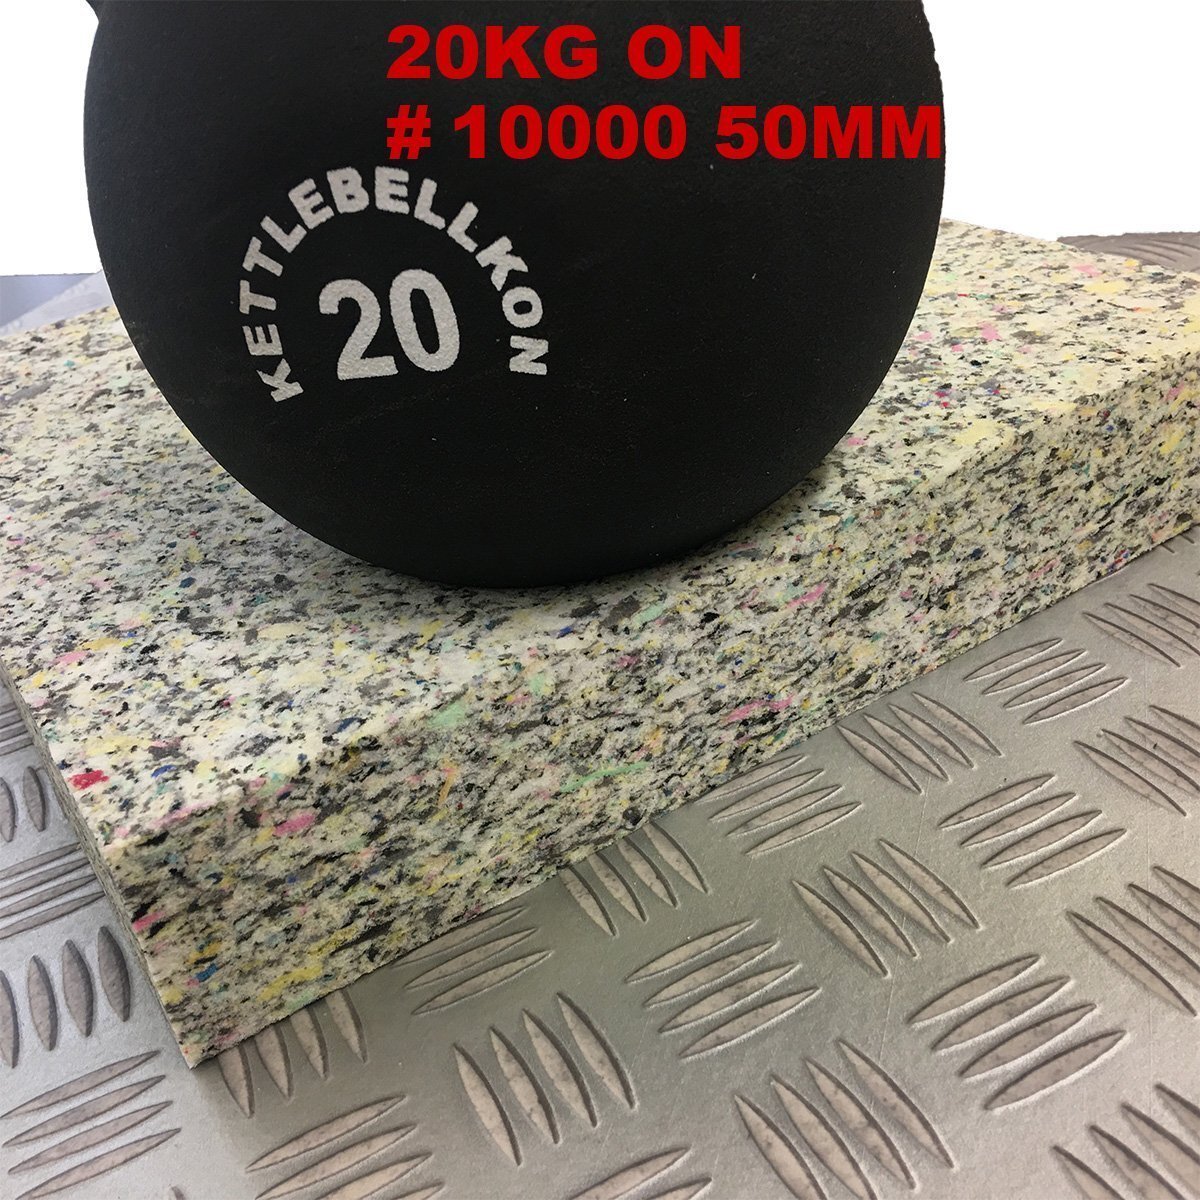  chip urethane [#10000 hardness Special .]1200x2000mm[ thickness 40mm] seat repair / sleeping area in the vehicle for bed / camper / deadning /